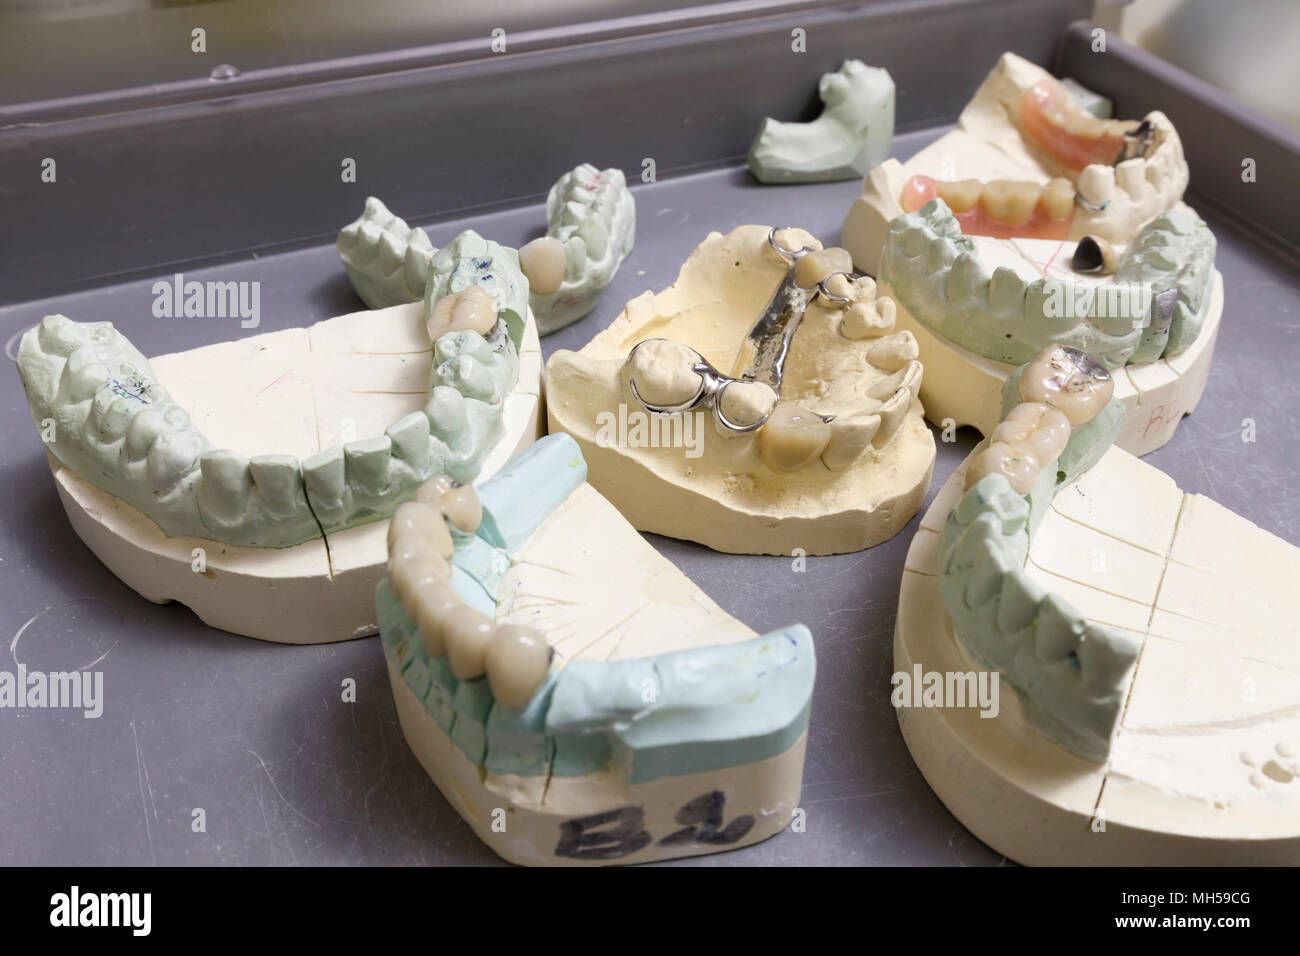 Different types of dental models of the human mouth and teeth. Stock Photo